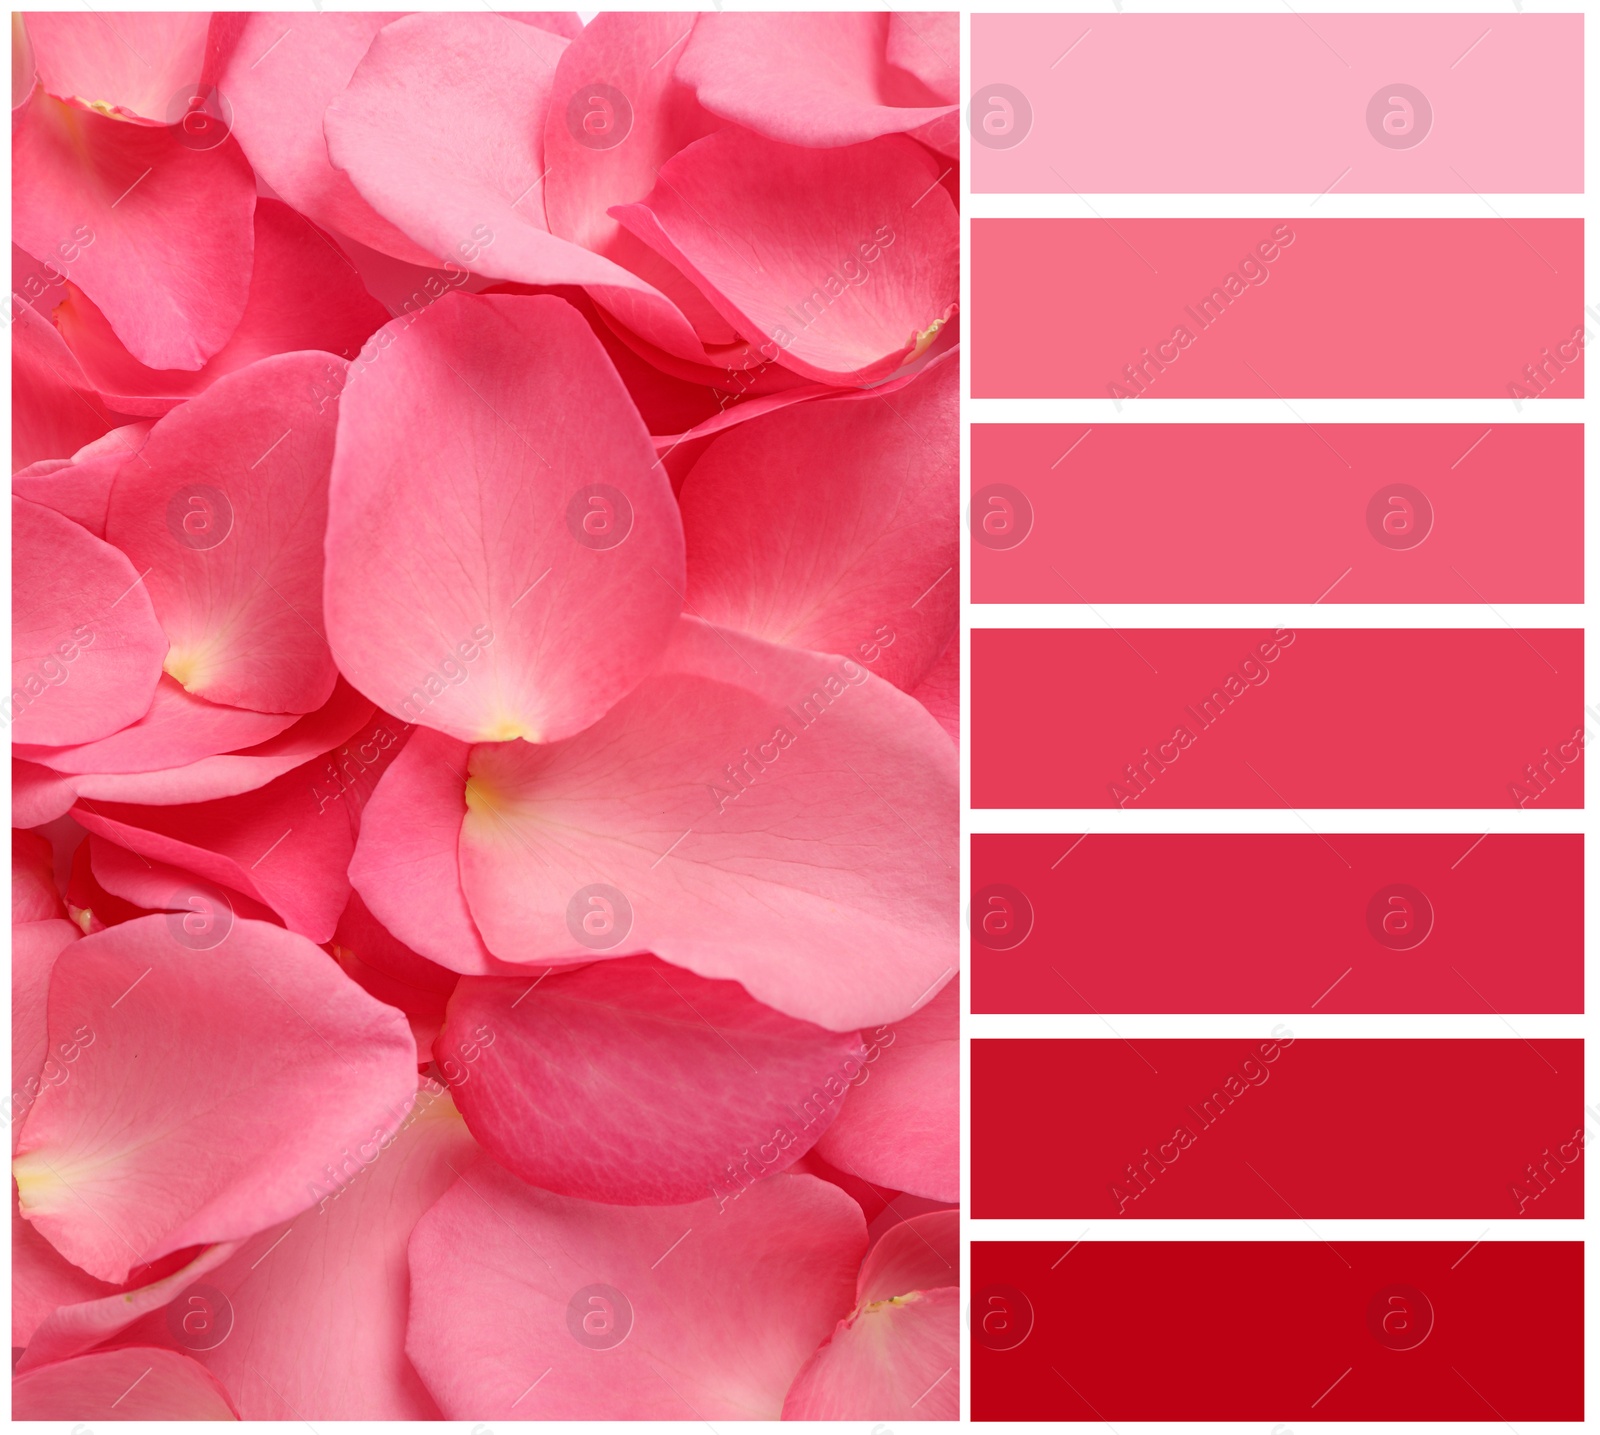 Image of Fresh pink rose petals and color palette. Collage